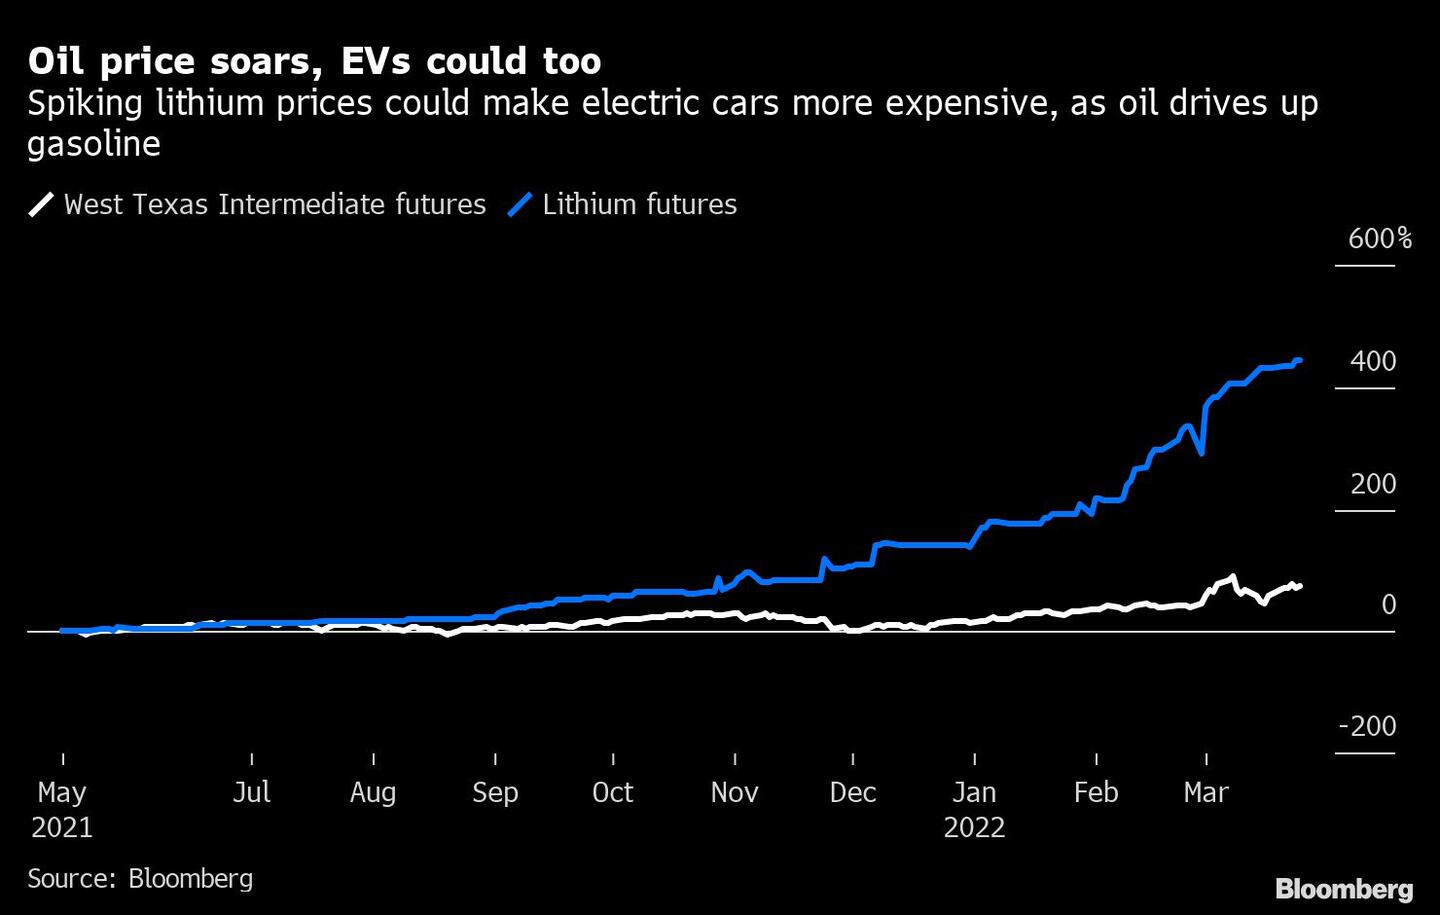 Oil price soars, EVs could toodfd